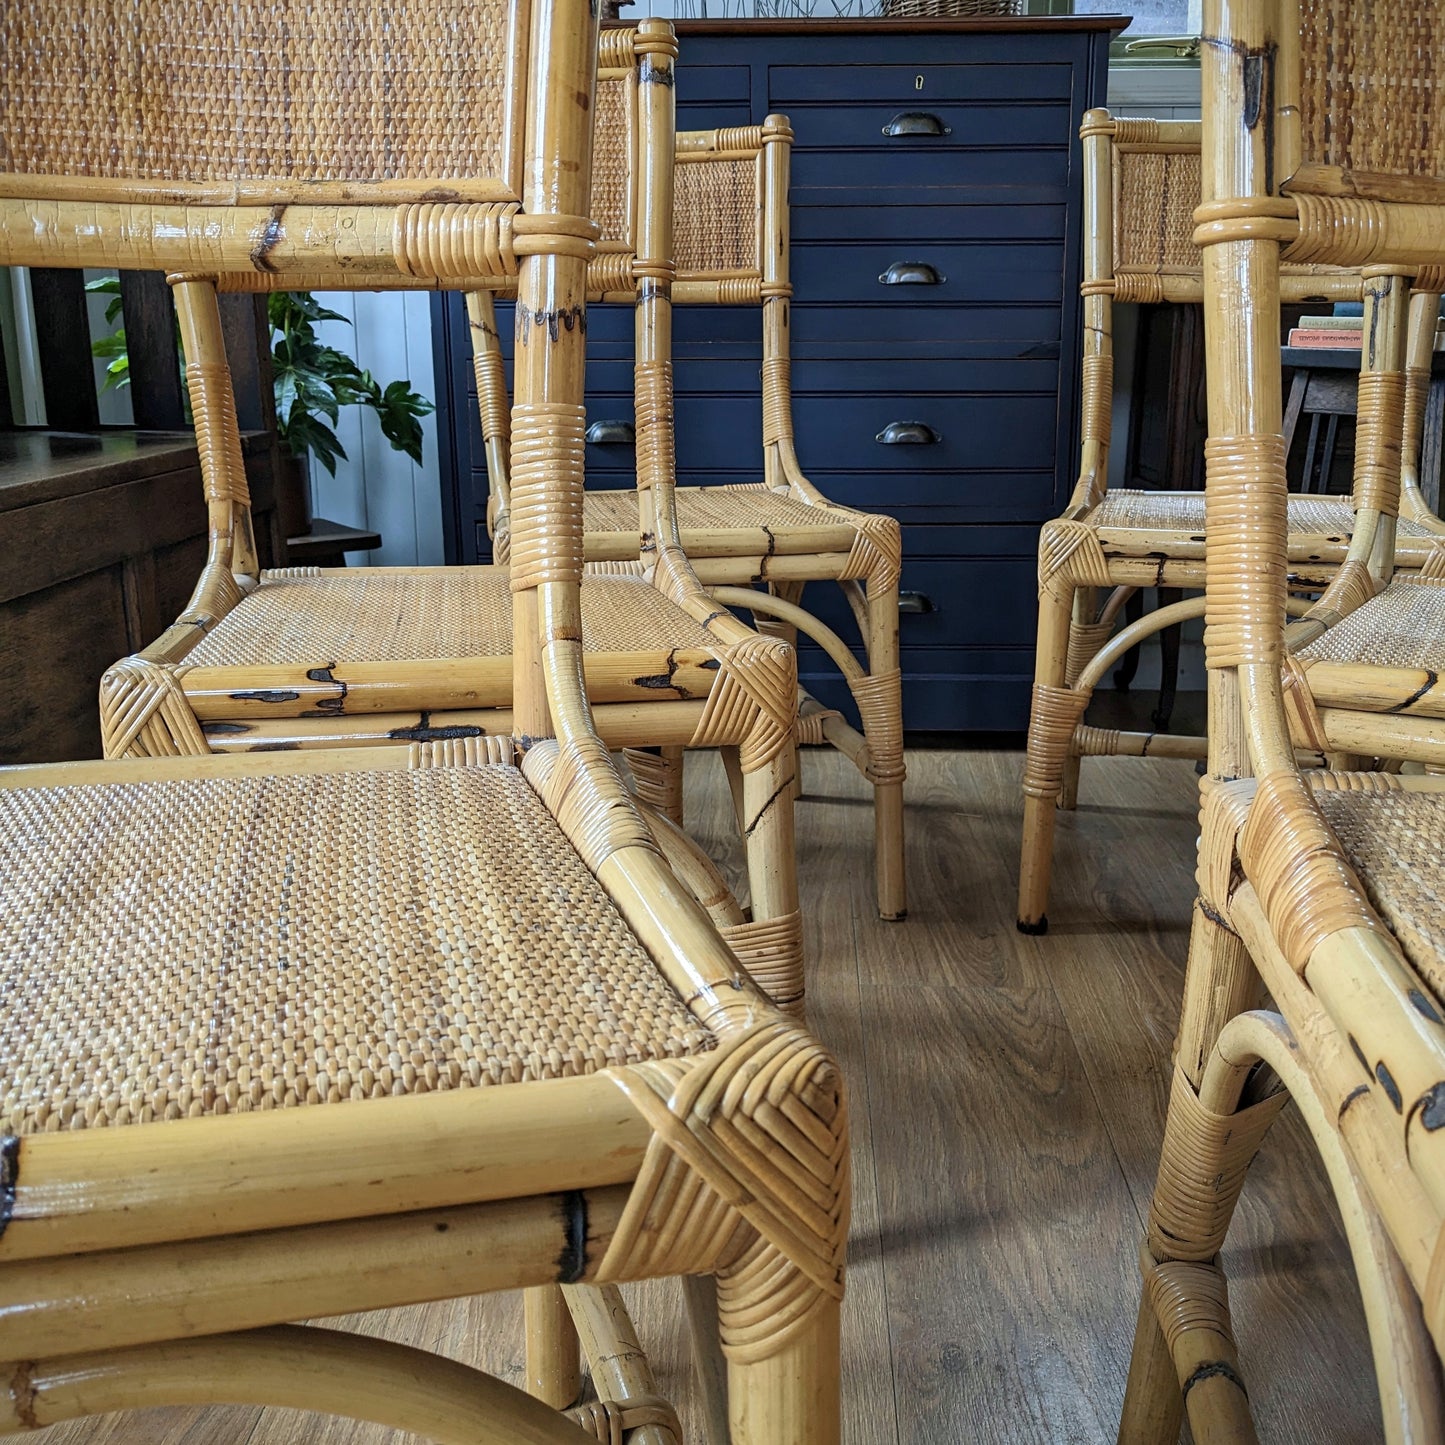 Mid Century Bamboo Dining Chairs